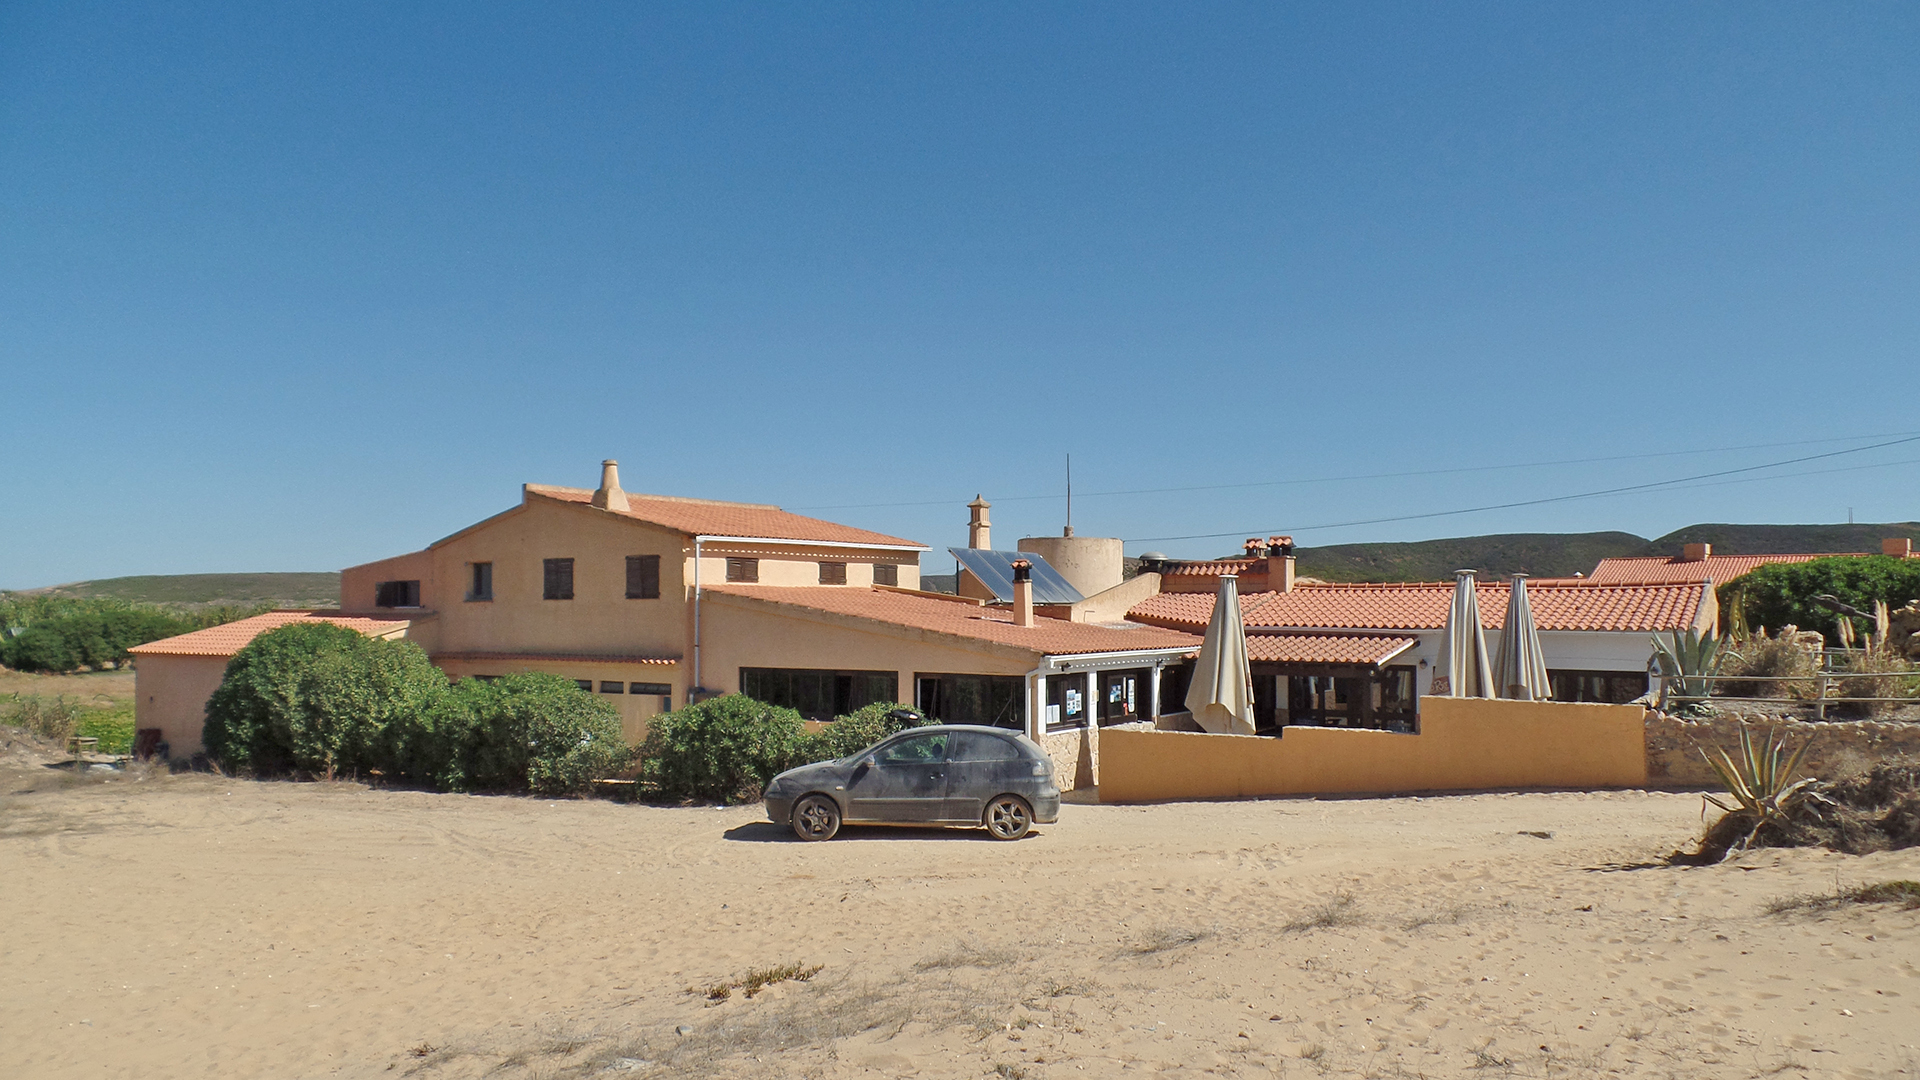 Beach restaurant with villa accommodation and land on Bordeira beach, West Coast | LG1248 Successful, traditional seafood and Portuguese cuisine restaurant and villa at superb beachside location - Praia de Bordeira, Carrapateira on the West Coast. With private parking and agricultural land for growing produce on site. Great investment potential as is, or for a project for alternative uses such as Bed and Breakfast, Hostel or surfcamp.